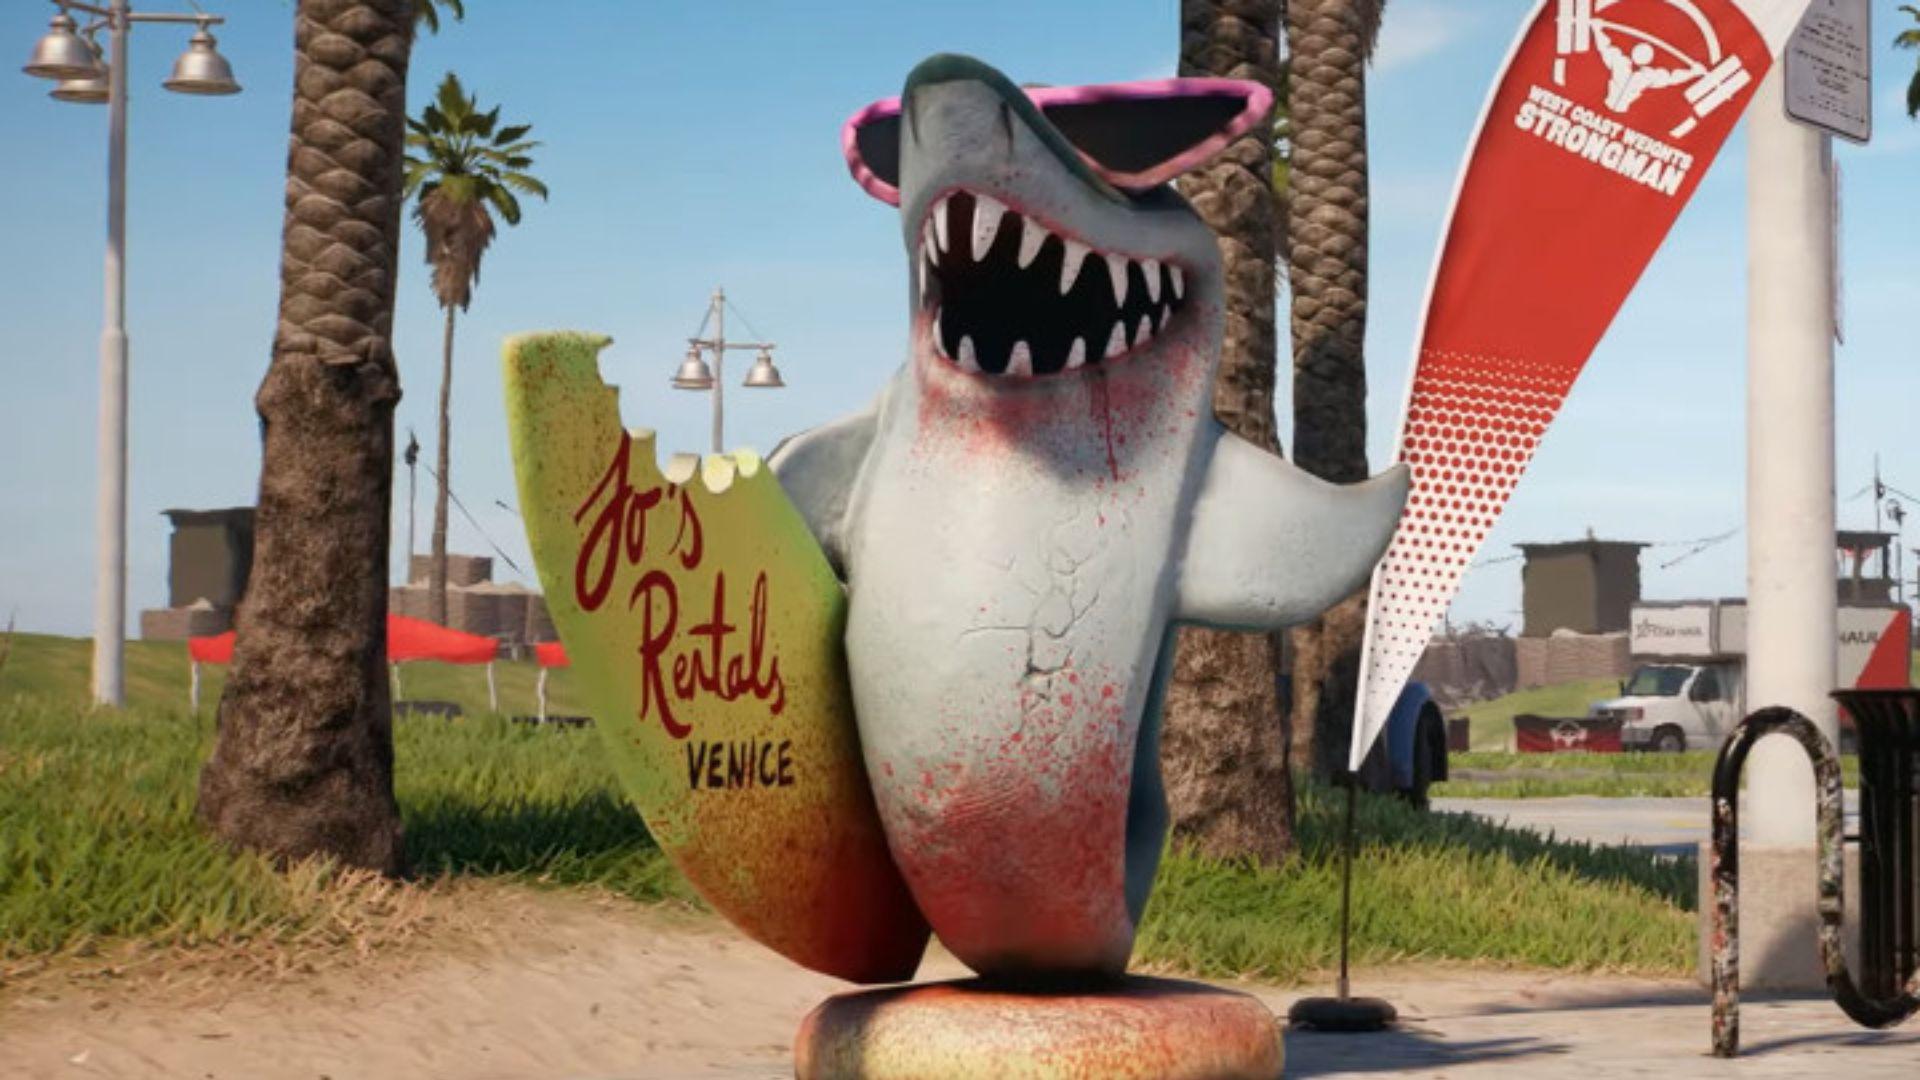 Everything we know about Dead Island 2 